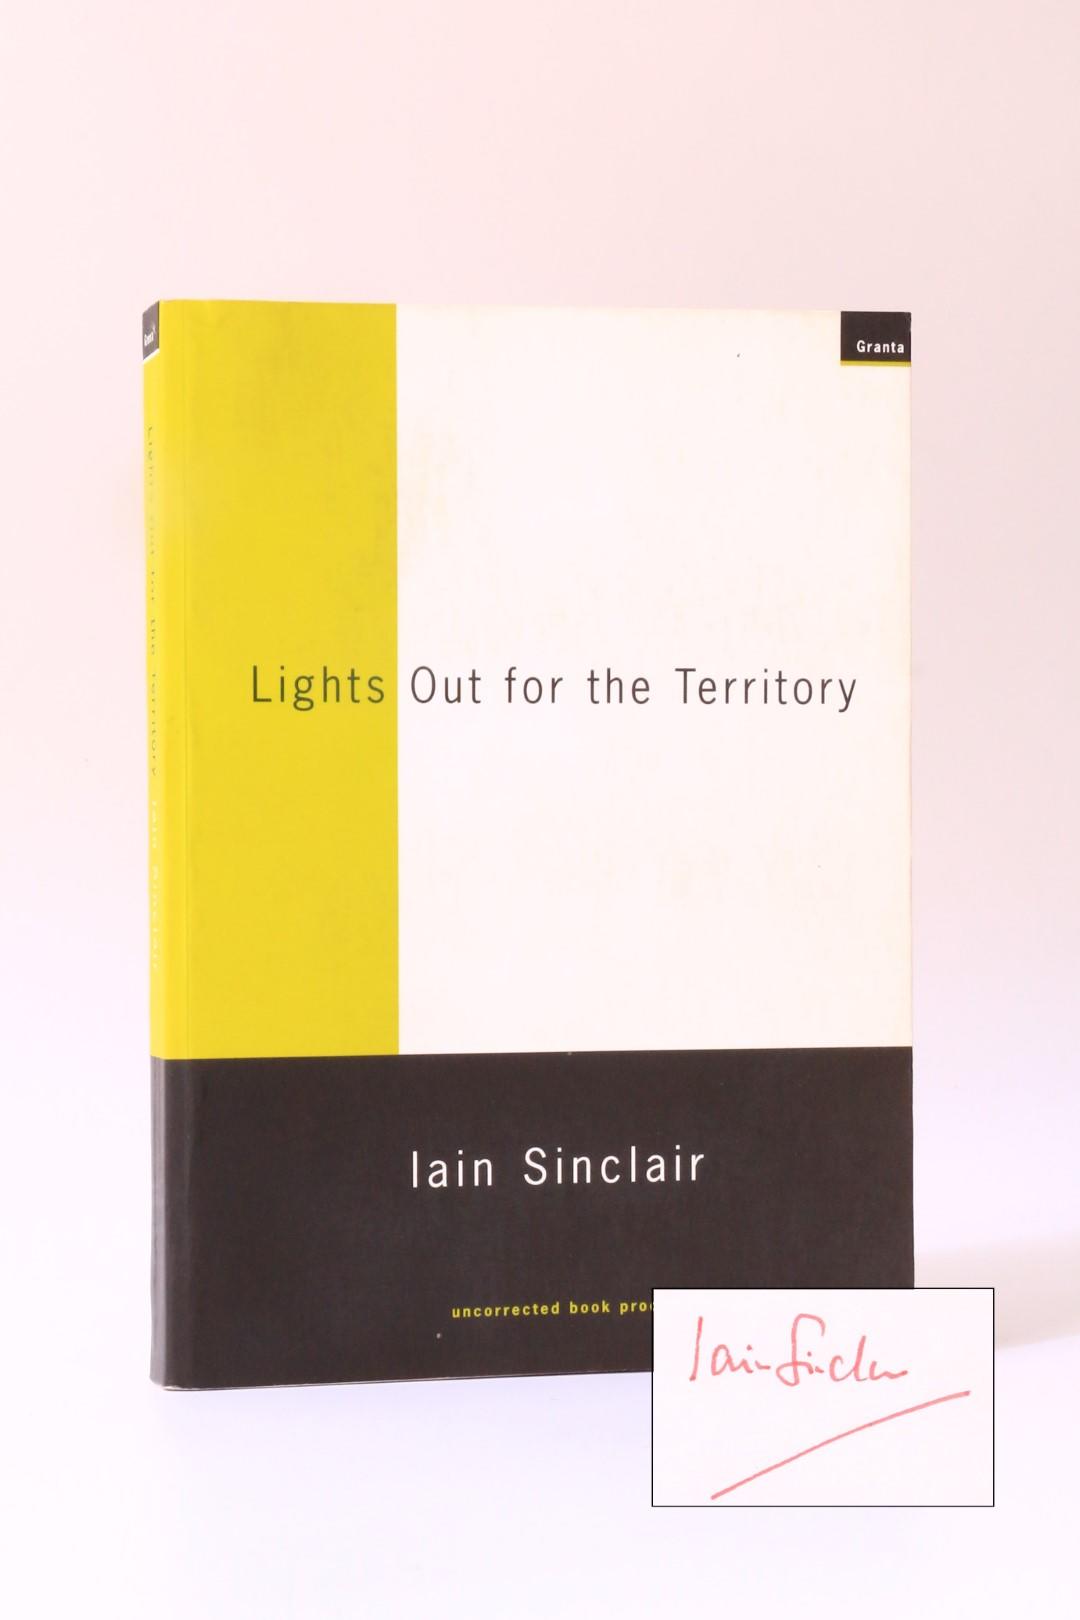 Iain Sinclair - Lights Out for the Territory - Granta, 1997, Proof. Signed